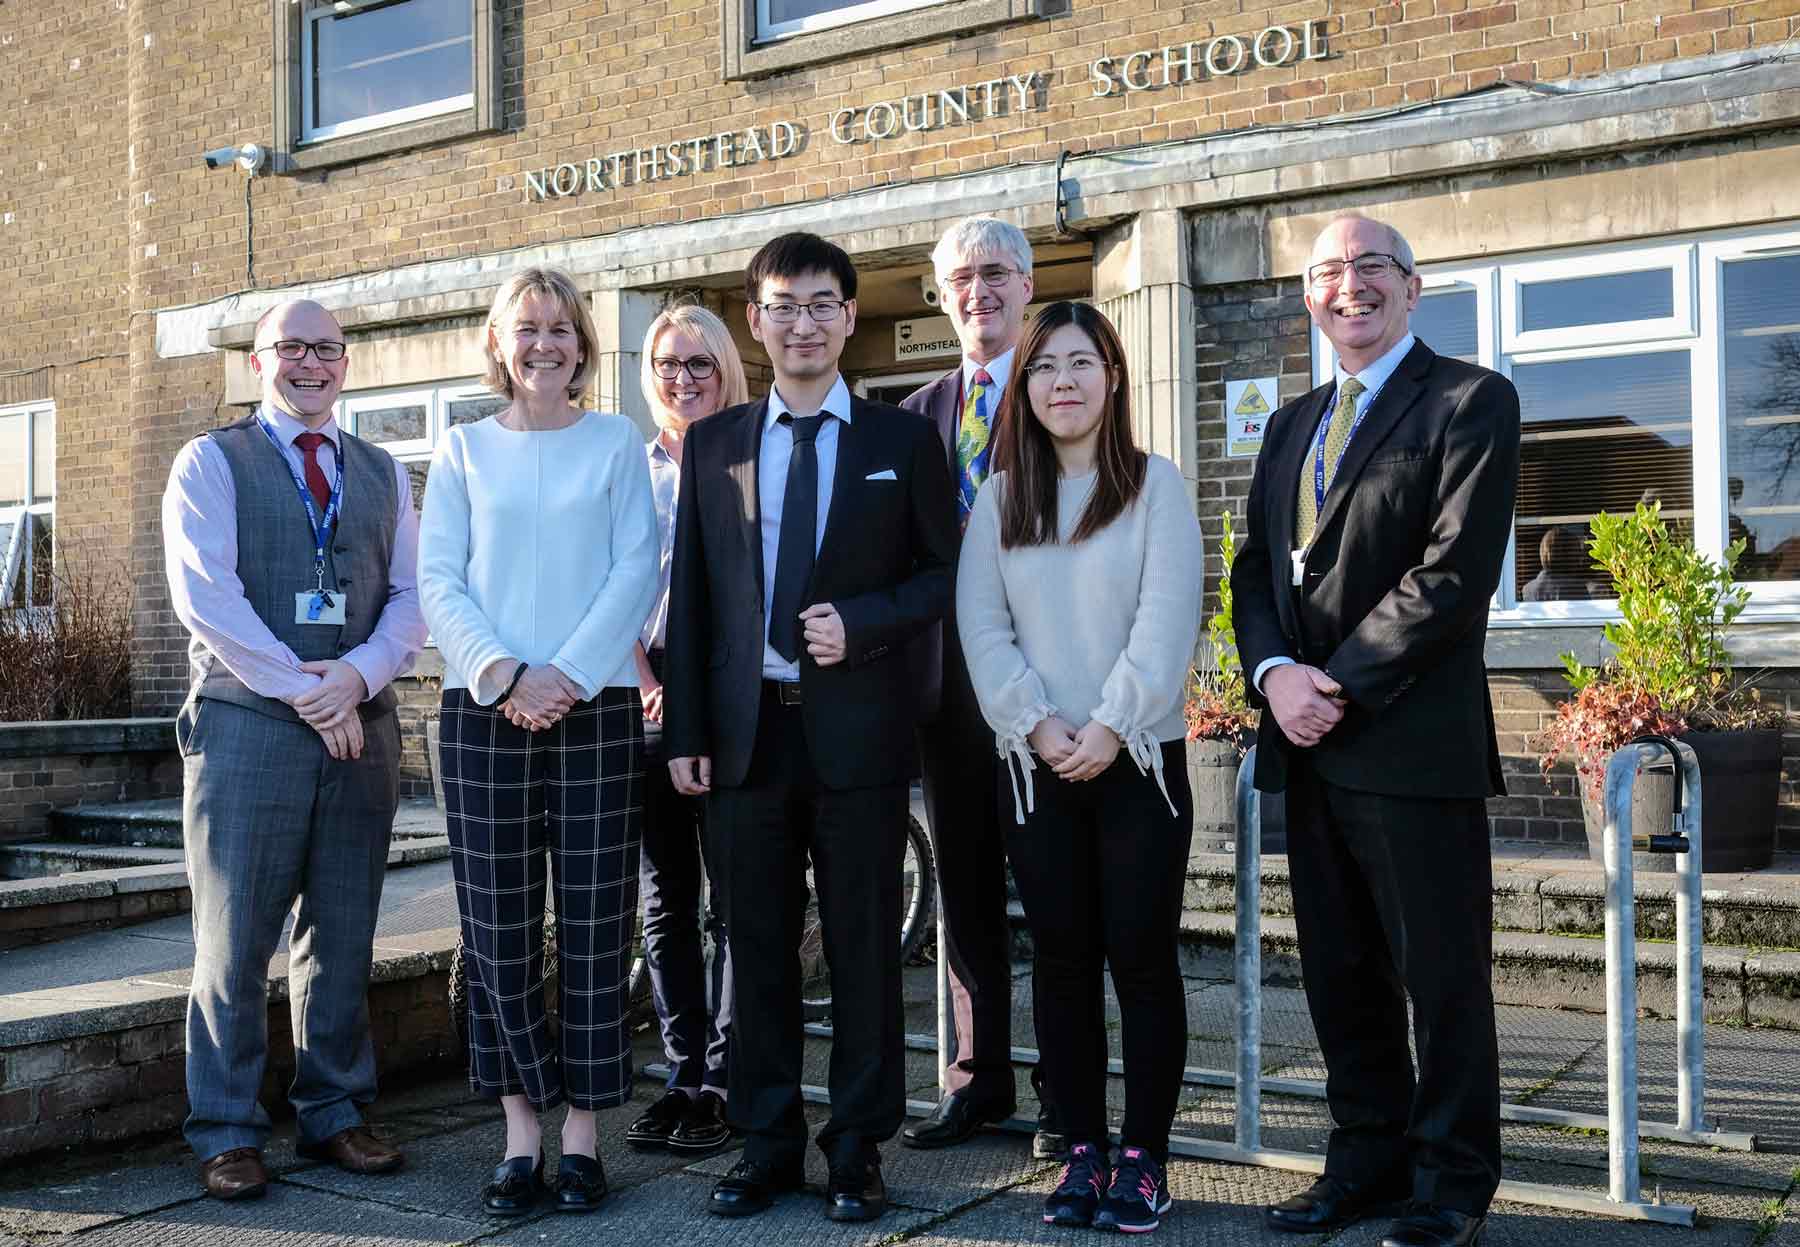 Matthew Davies - Primary Mastery Specialist, Kim Mitchell - Primary Mastery Lead for the Yorkshire Ridings Maths Hub, Emily Crankshaw - Primary Mastery Specialist, Lu Yong - Shanghai teacher, Colin Prestwich – Maths Hub Lead, Chen Jiajun - Shanghai teacher and Jim Lidgley, Headteacher at Northstead Community Primary School